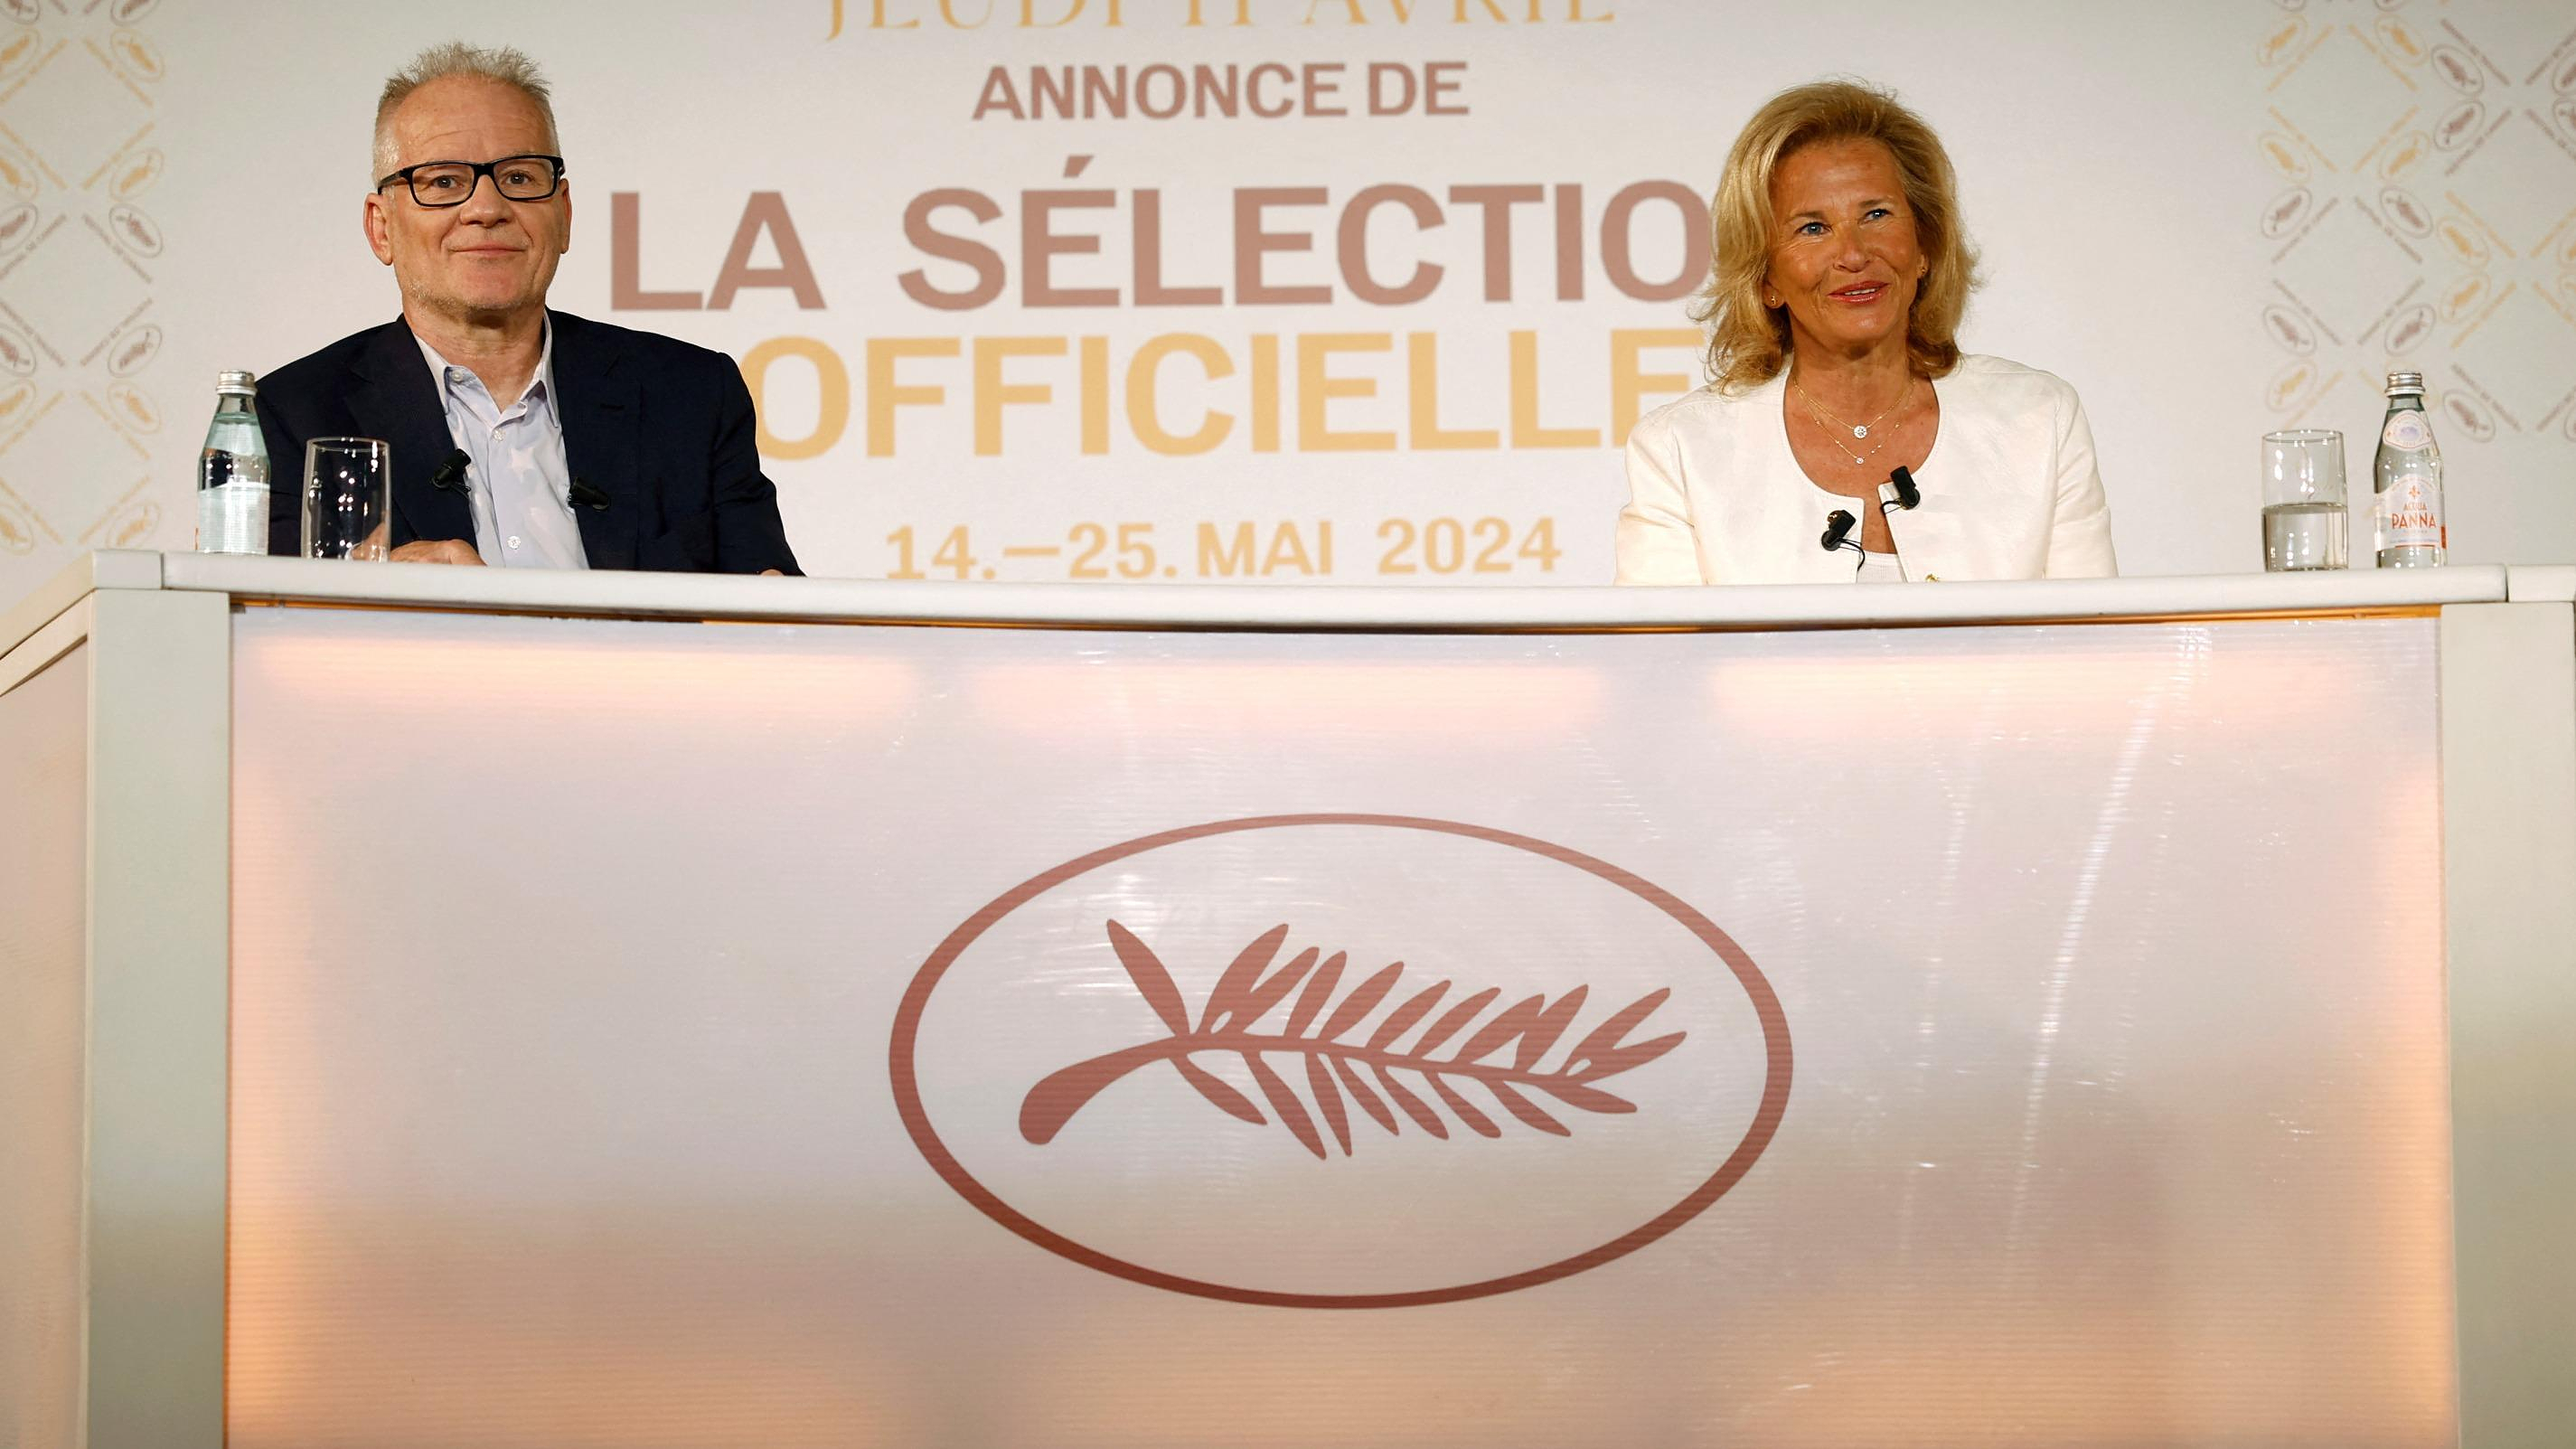 Mohammad Rasoulof and Michel Hazanavicius in competition at the Cannes Film Festival